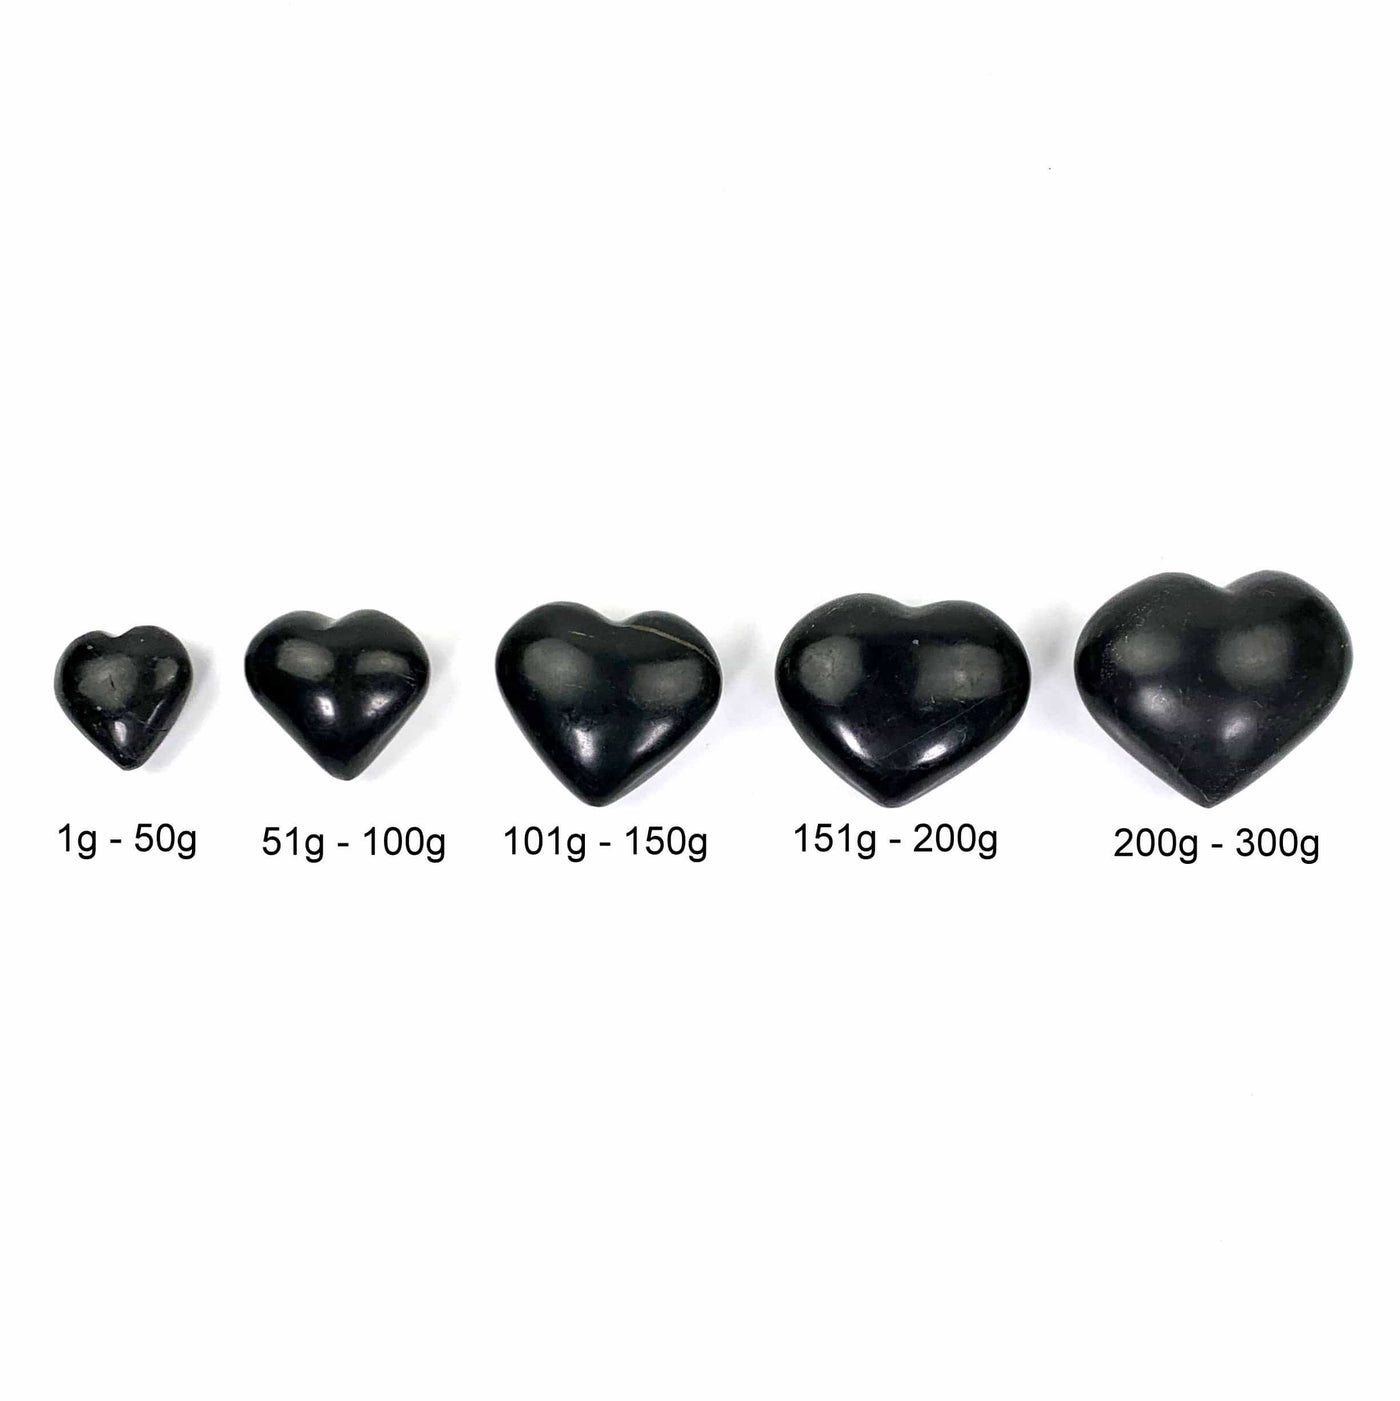 the 5 different size variations of black onyx hearts lined up to show size difference